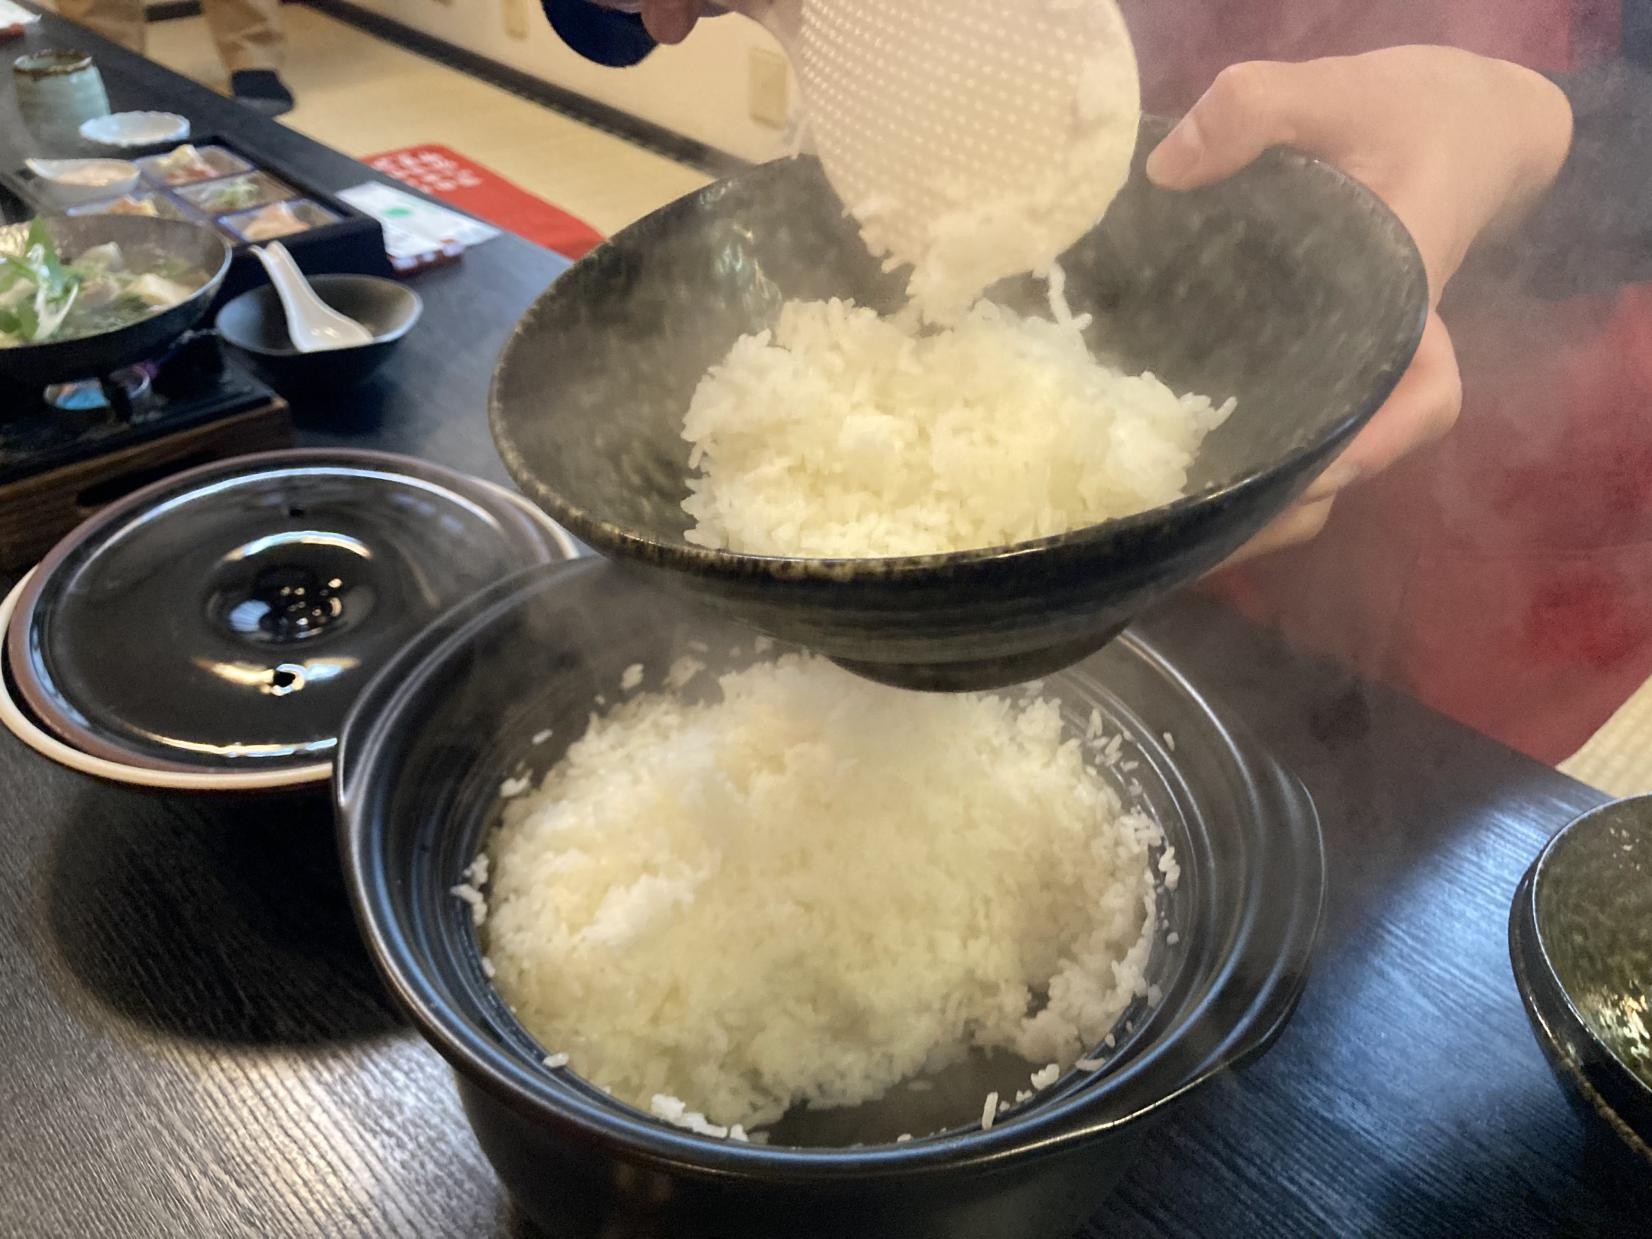 ”HANIWA" Yusui Specialty: Hotpot Rice Meal using Local Spring Water-0